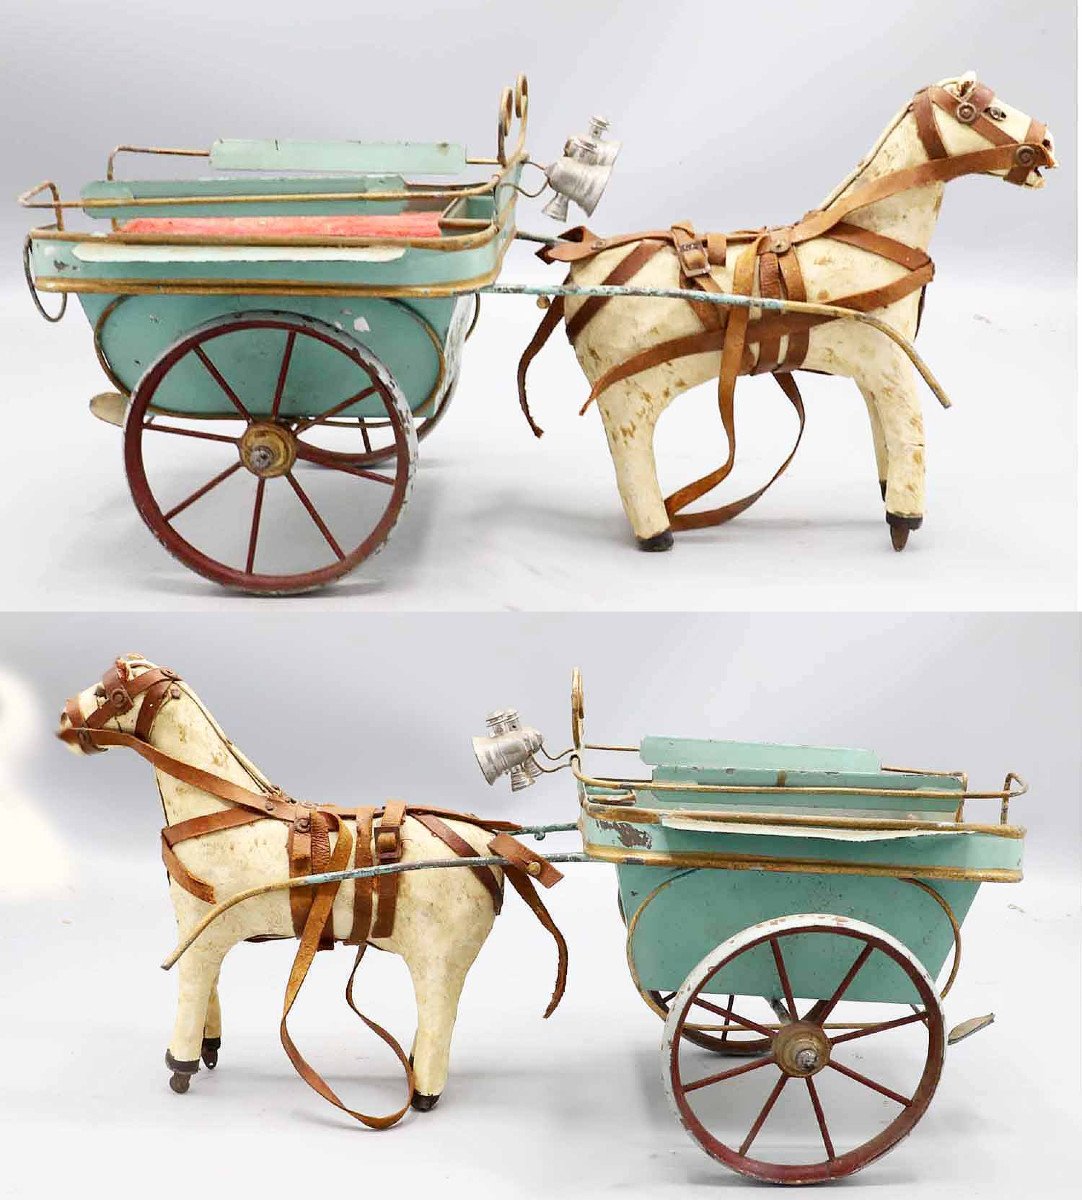 French Toy Carriole Around 1880 - 1900